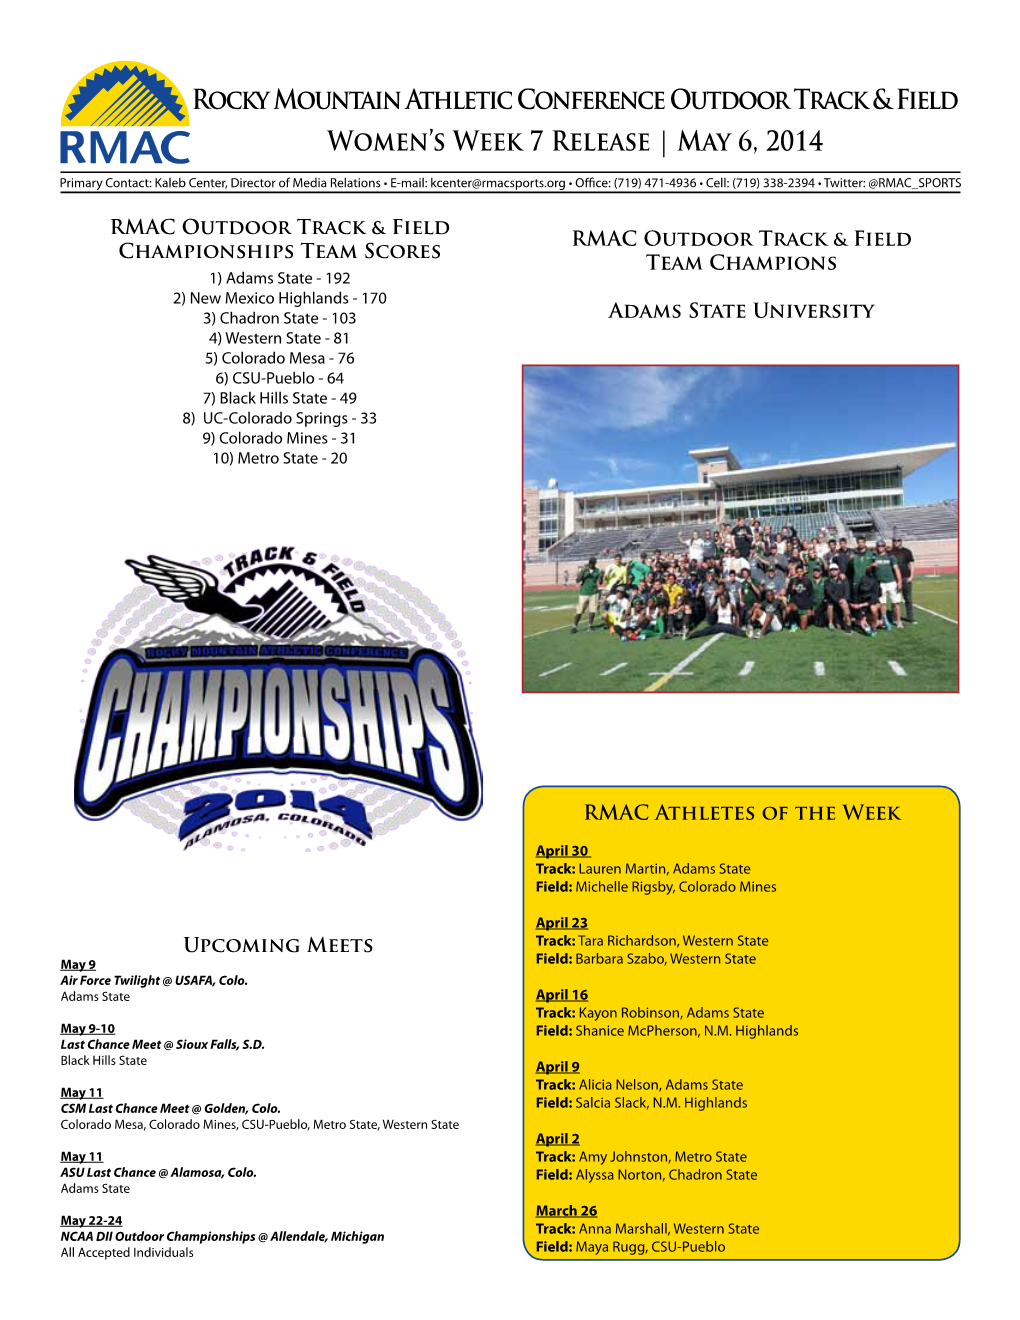 Rocky Mountain Athletic Conference Outdoor Track & Field Women's